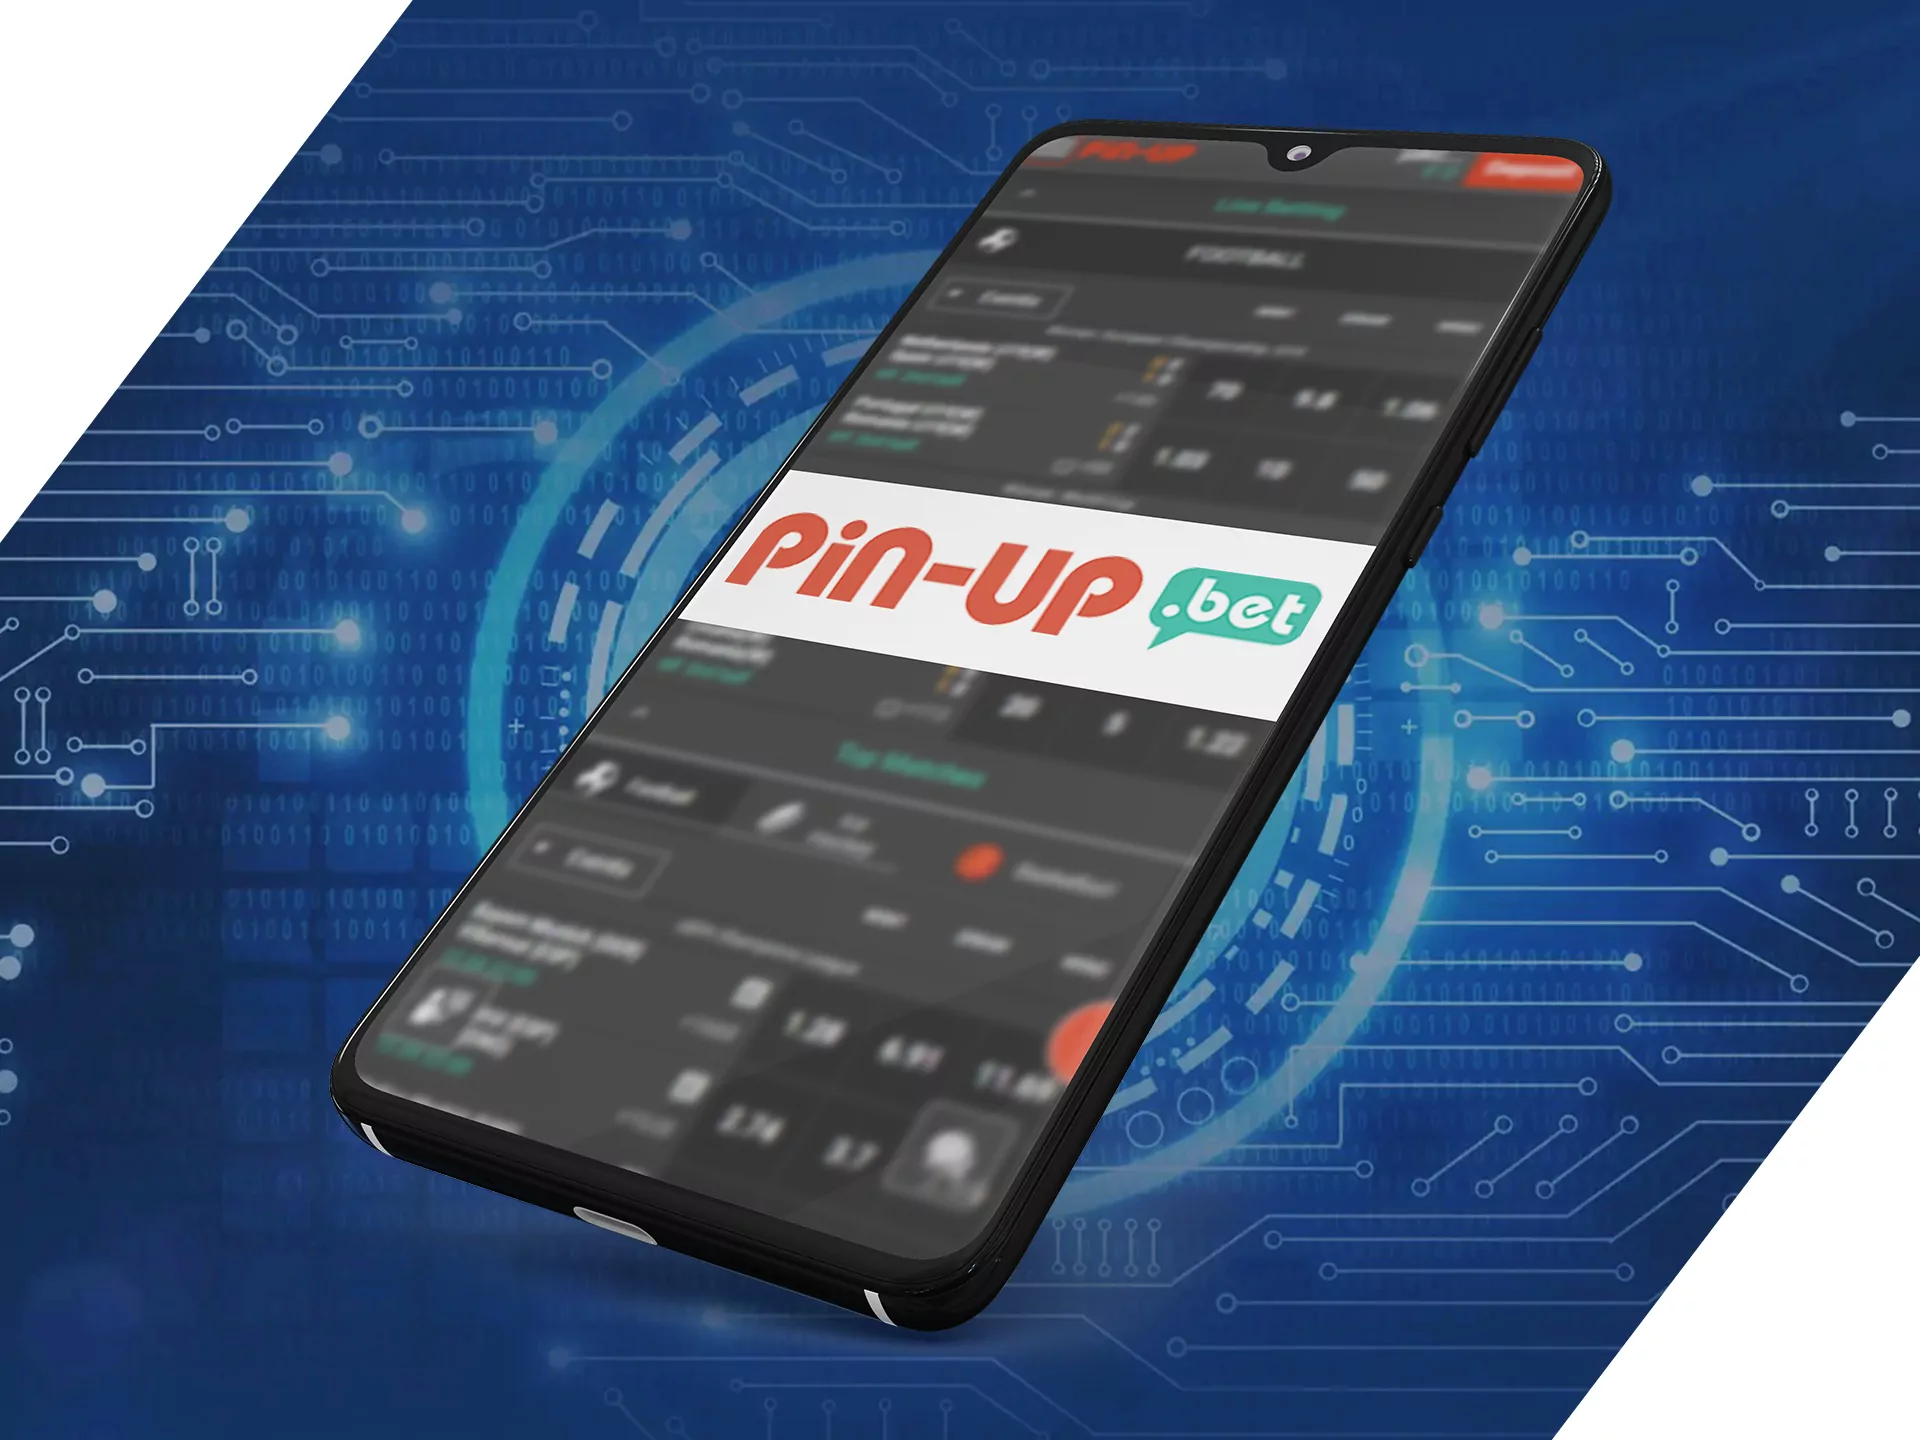 Pin Up app secures all of your information.